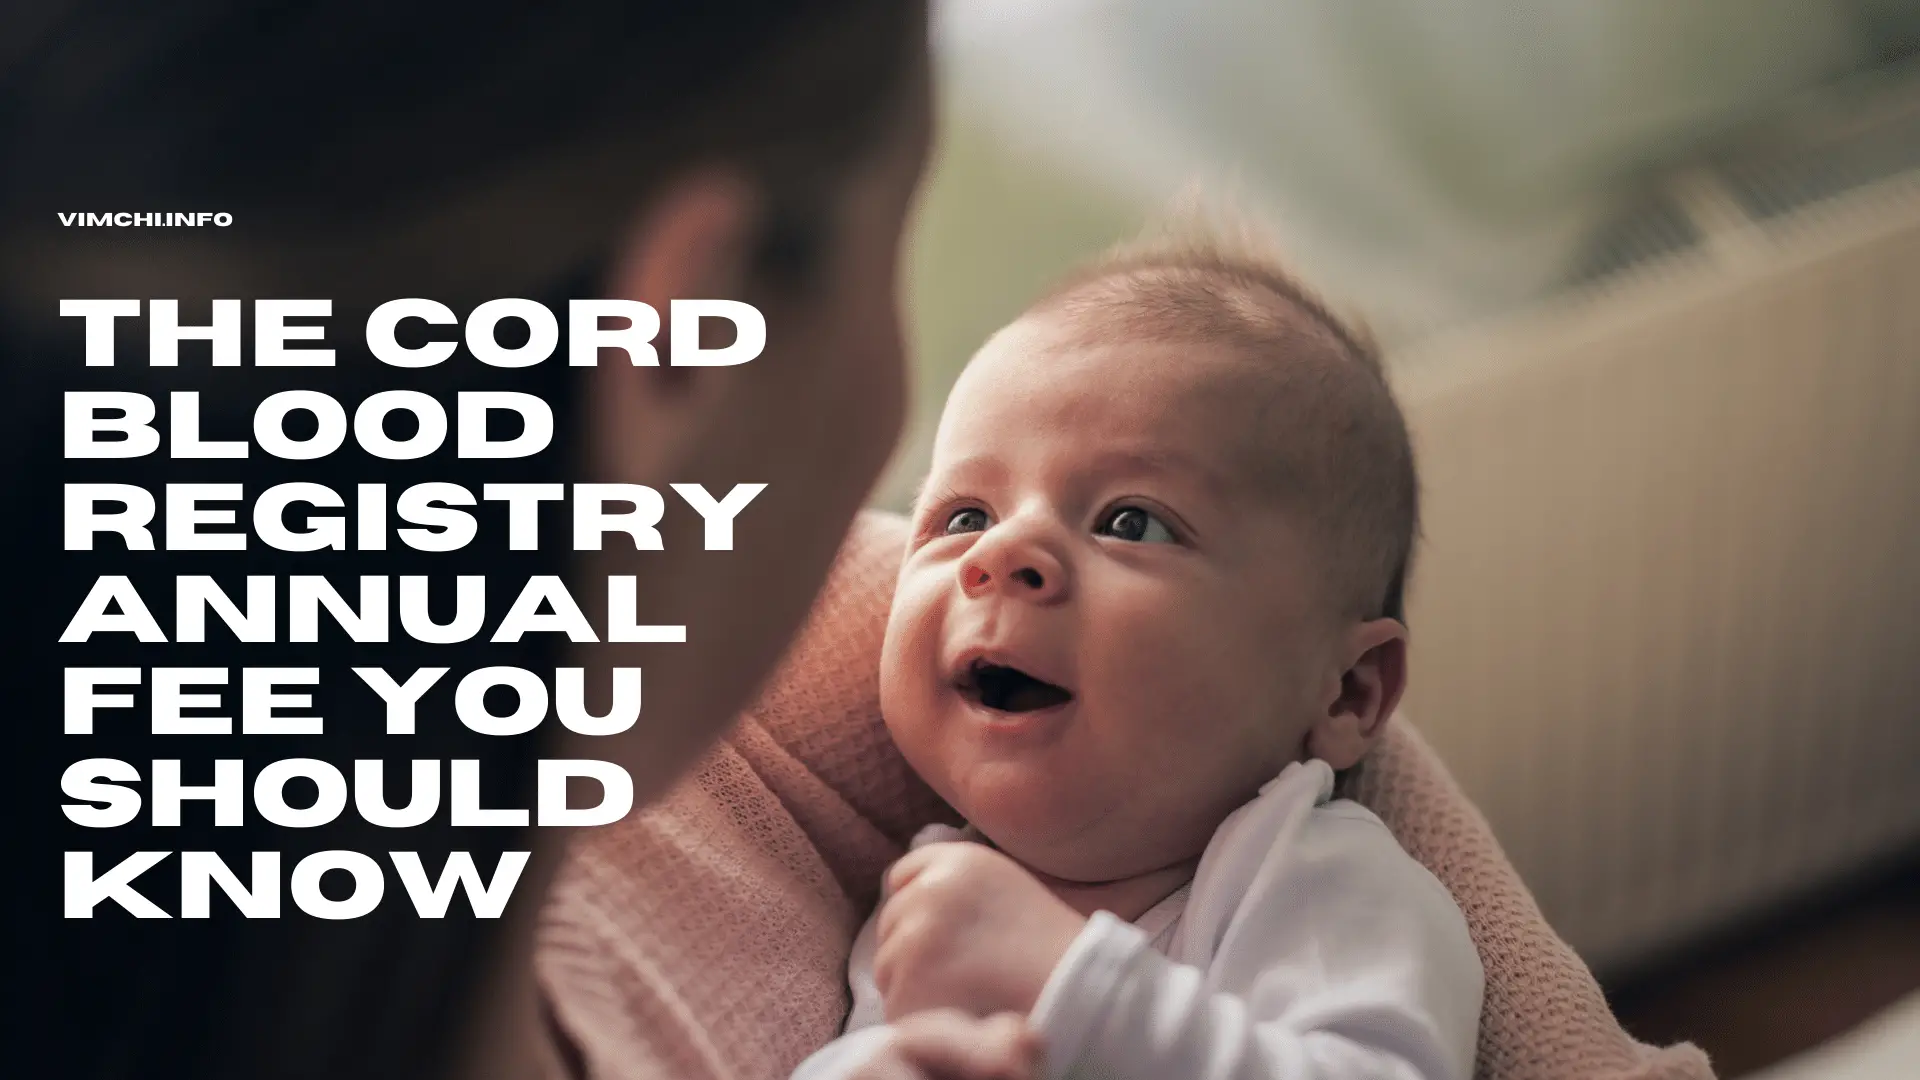 The Cord Blood Registry Annual Fee You Should Know